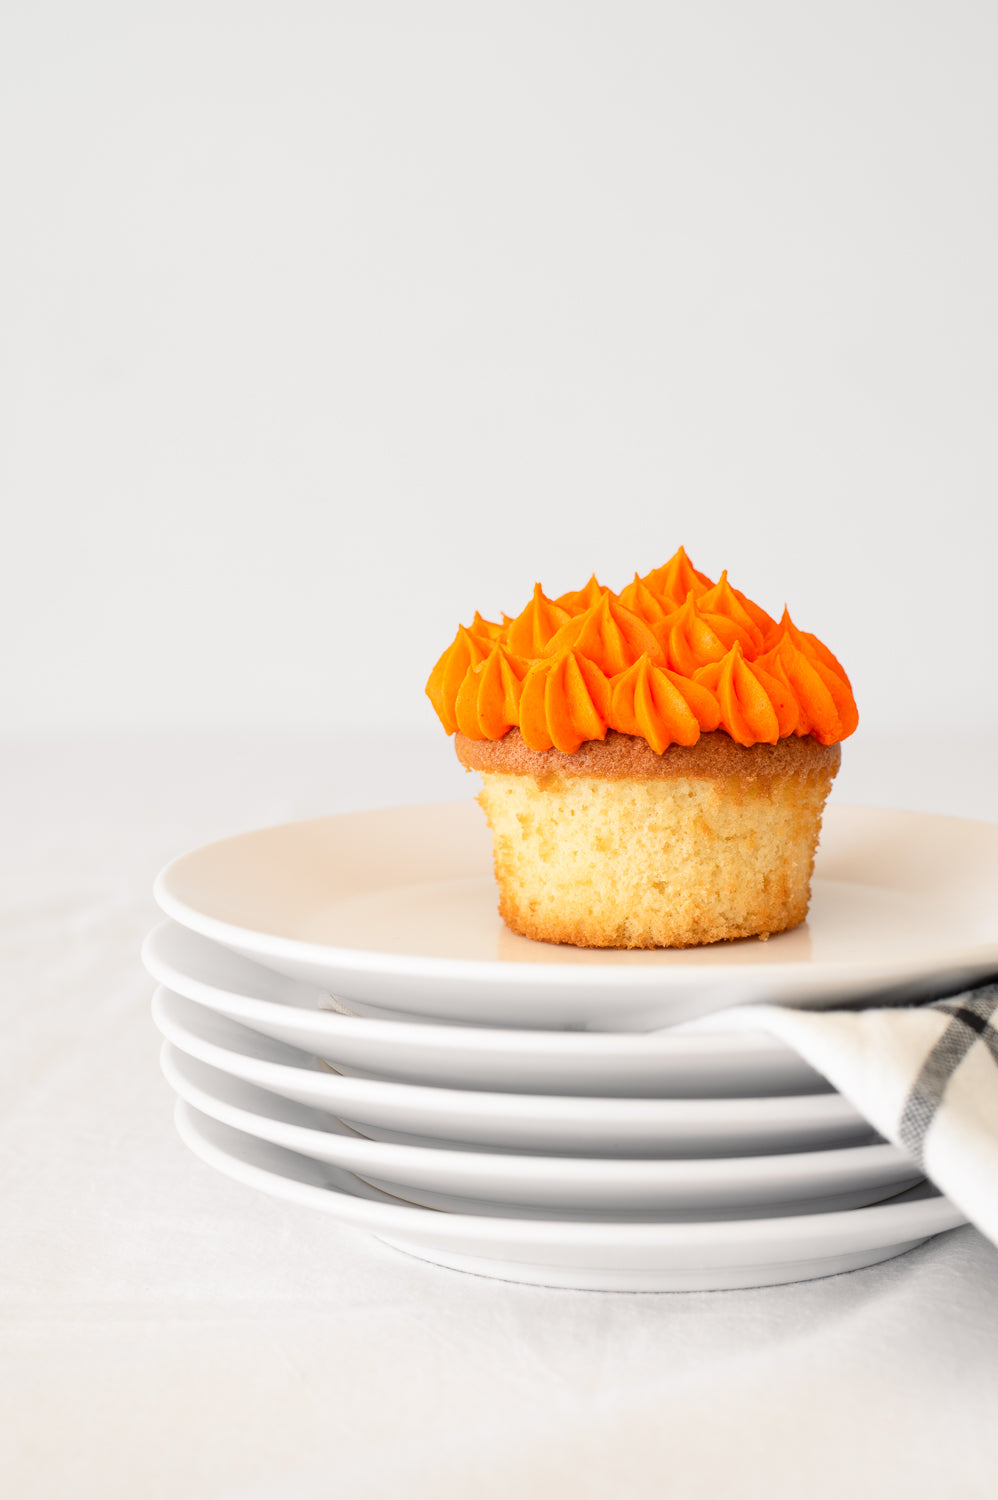 A stack of plates holding a vanilla cupcake with orange piped icing